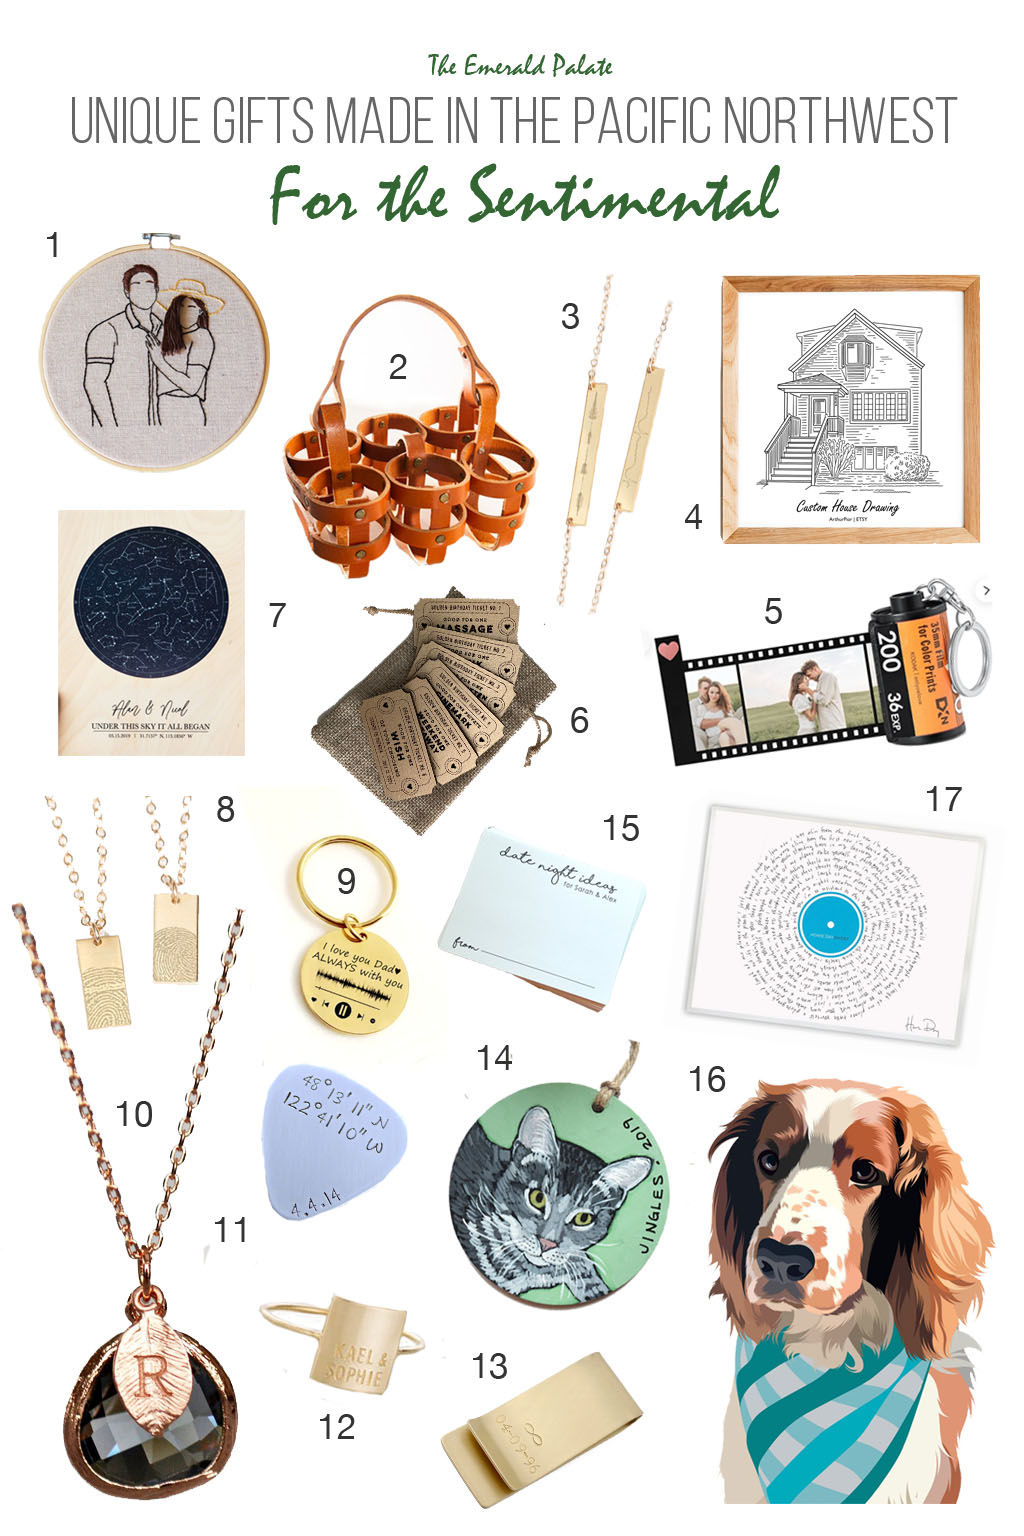 A collection of Pacific Northwest gifts for the sentimental who love personalized gifts